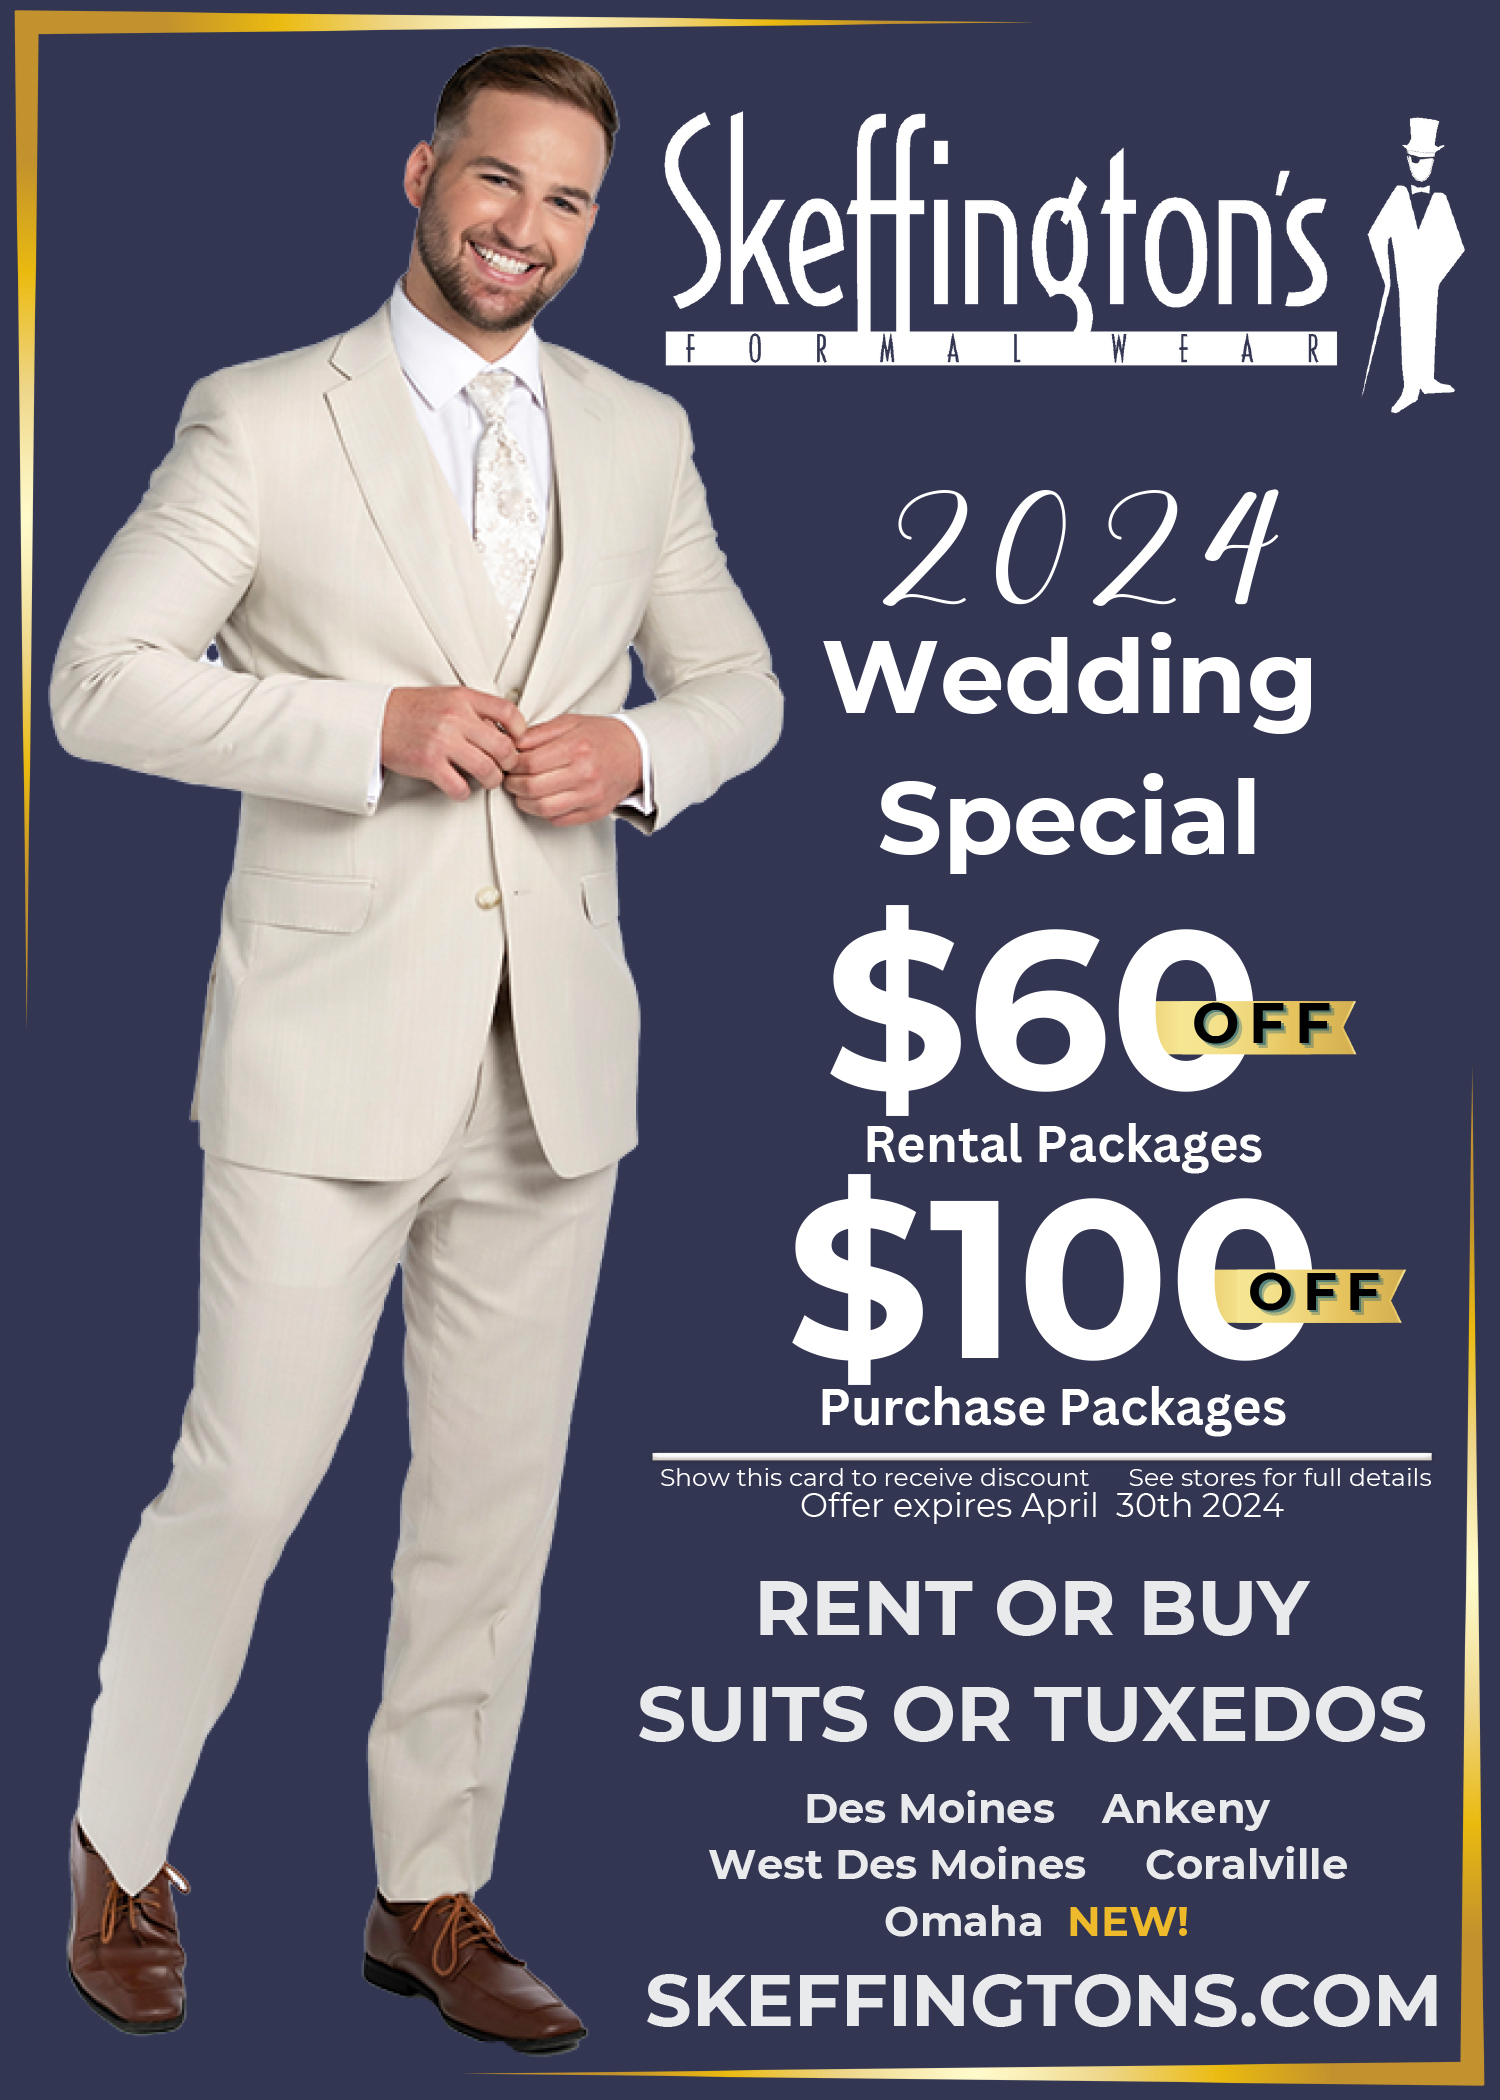 2024 Wedding Special Promotional Card. Download and present in a Skeffington's retail store for  off rentals or 0 off purchase.